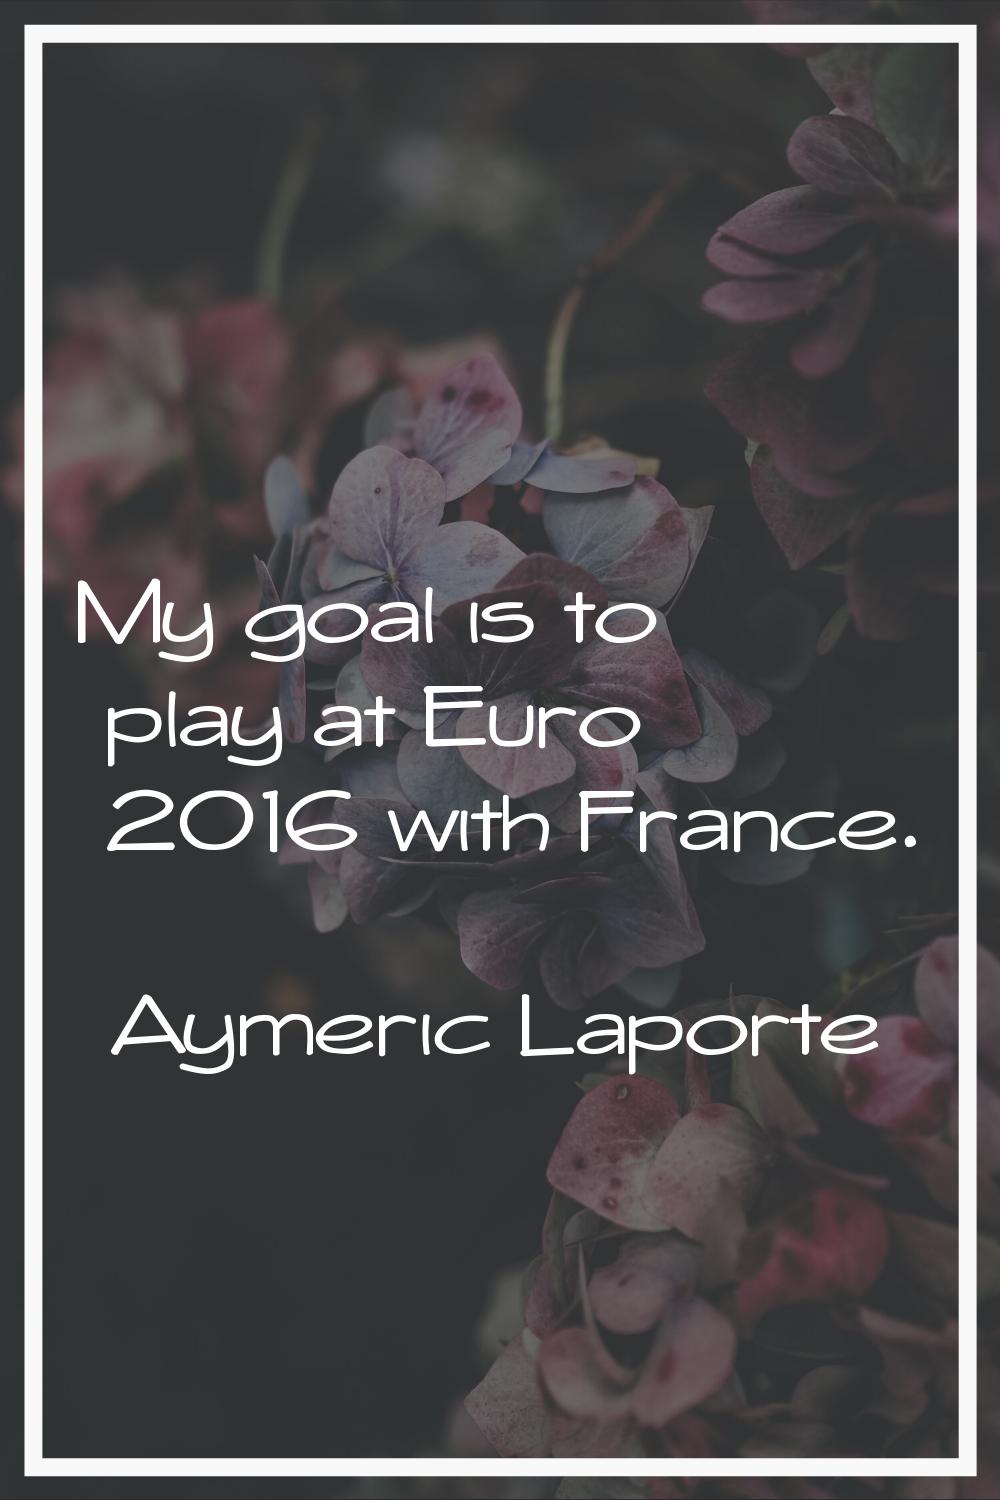 My goal is to play at Euro 2016 with France.